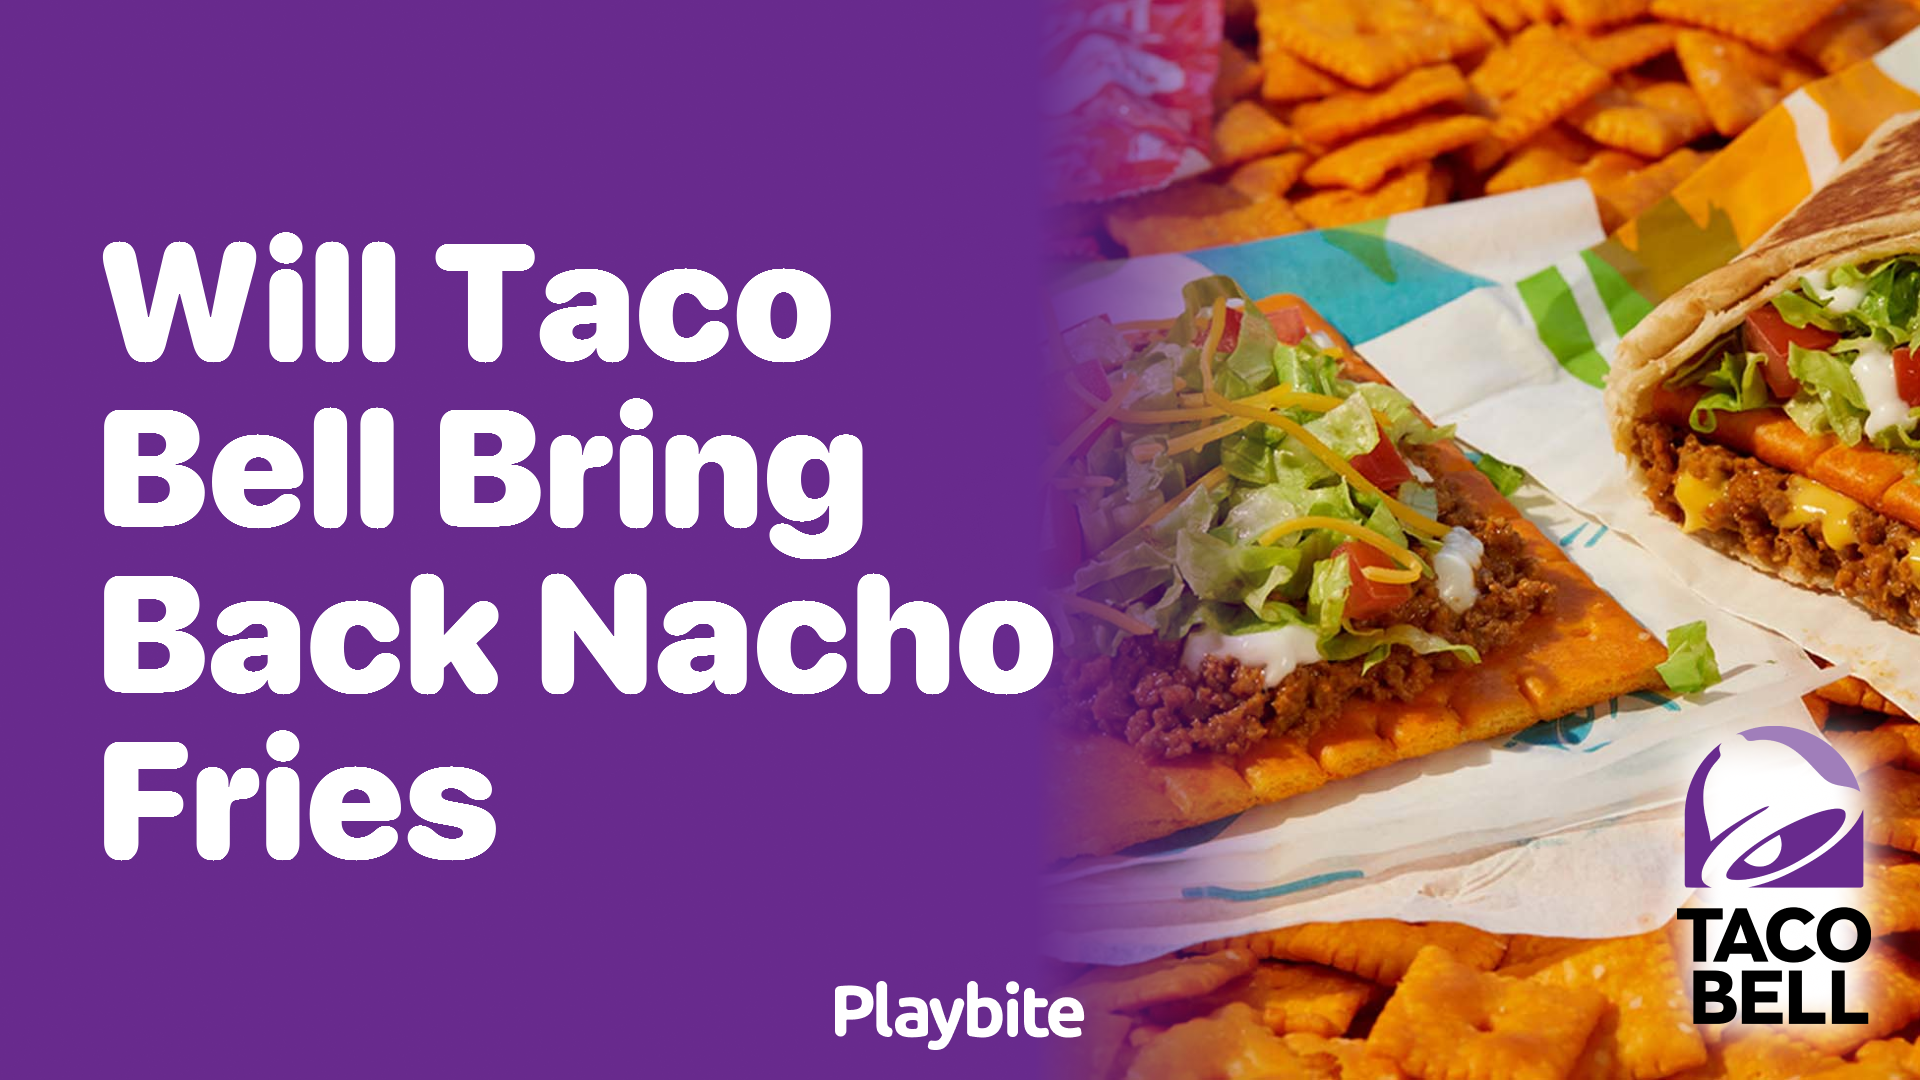 Will Taco Bell Bring Back Nacho Fries?